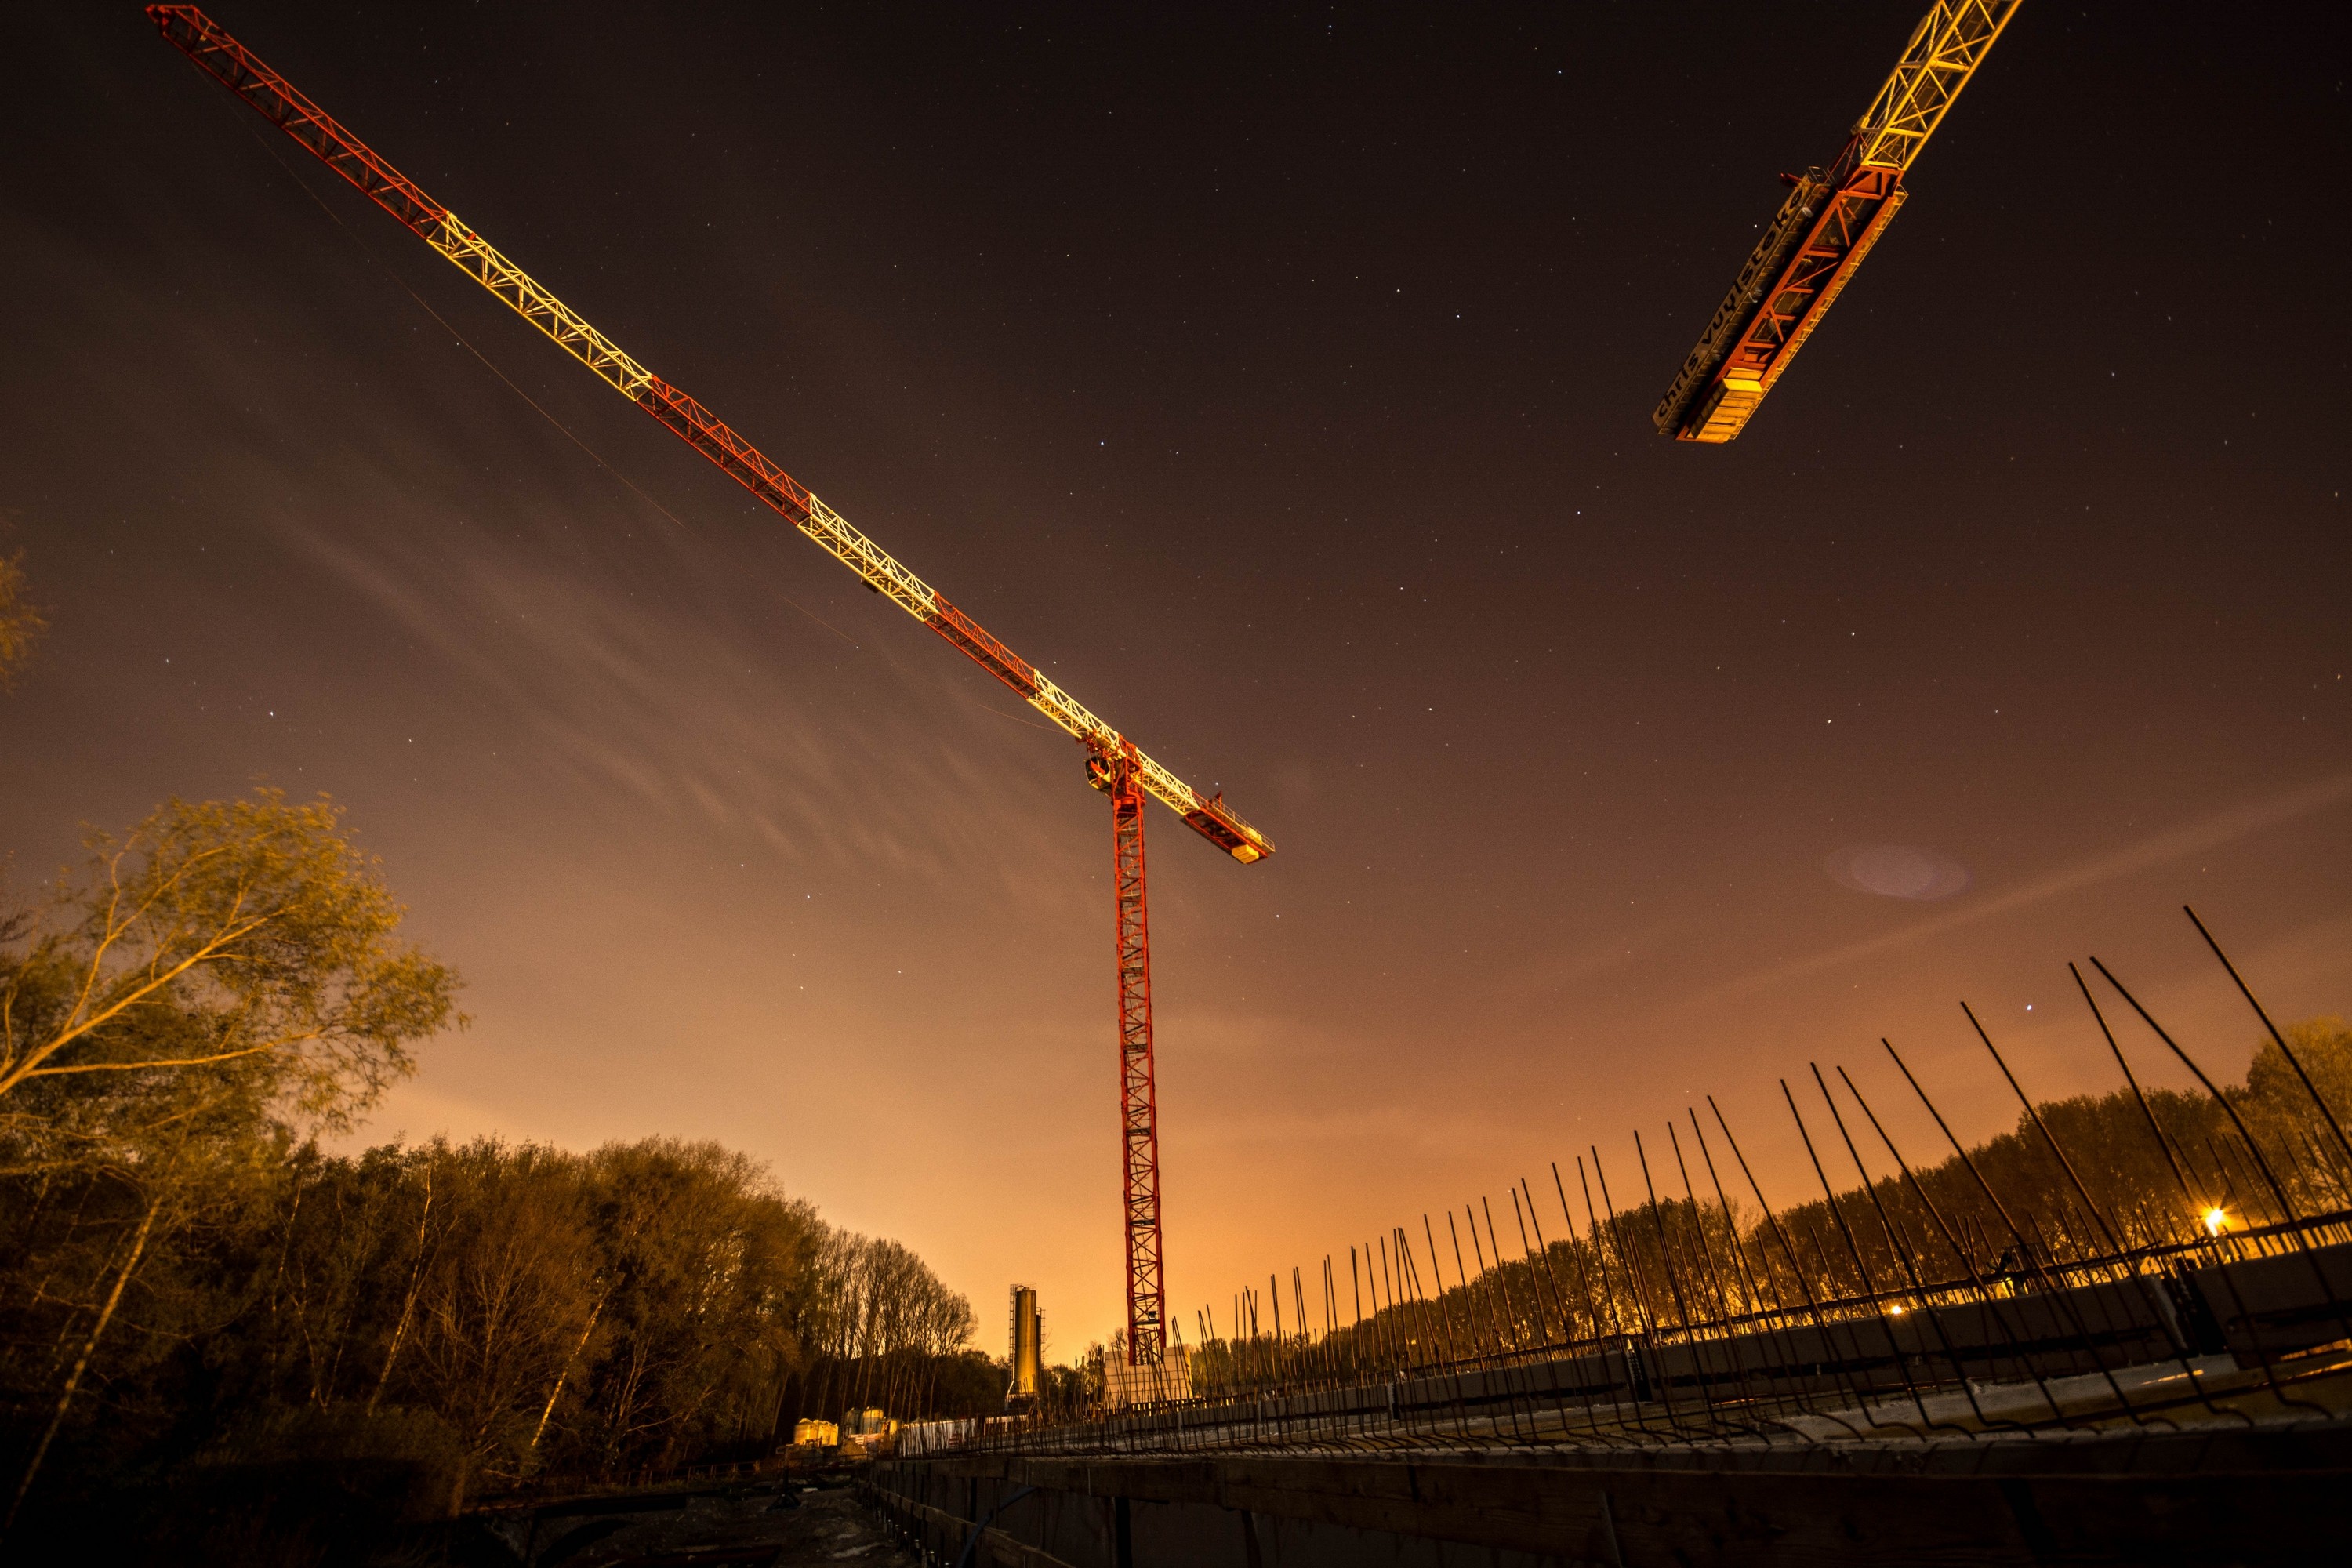 General 3000x2000 clouds trees cranes (machine) low light outdoors construction site